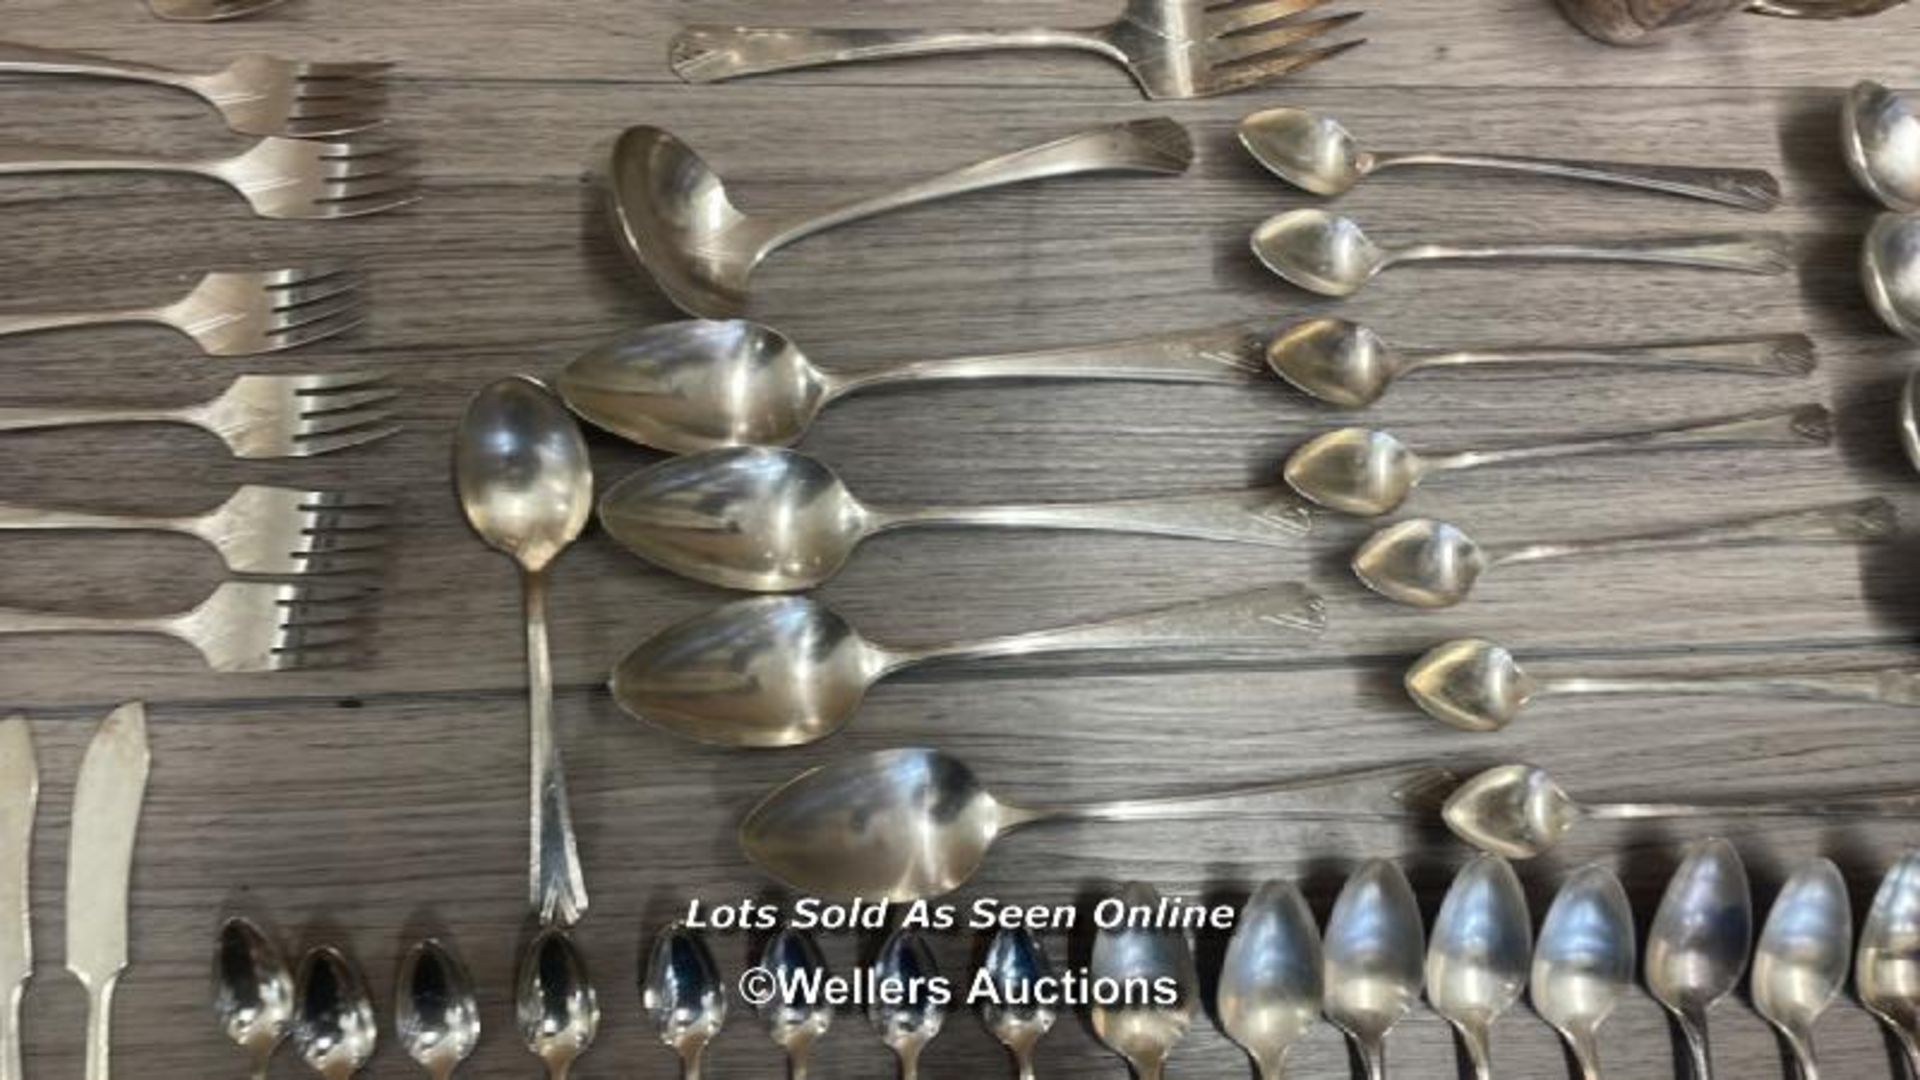 A LARGE COLLECTION OF COMMUNITY PLATE CUTLERY, COFFEE POT, MILK JUG, SUGAR BOWL AND SUGAR NIPS - Image 7 of 16